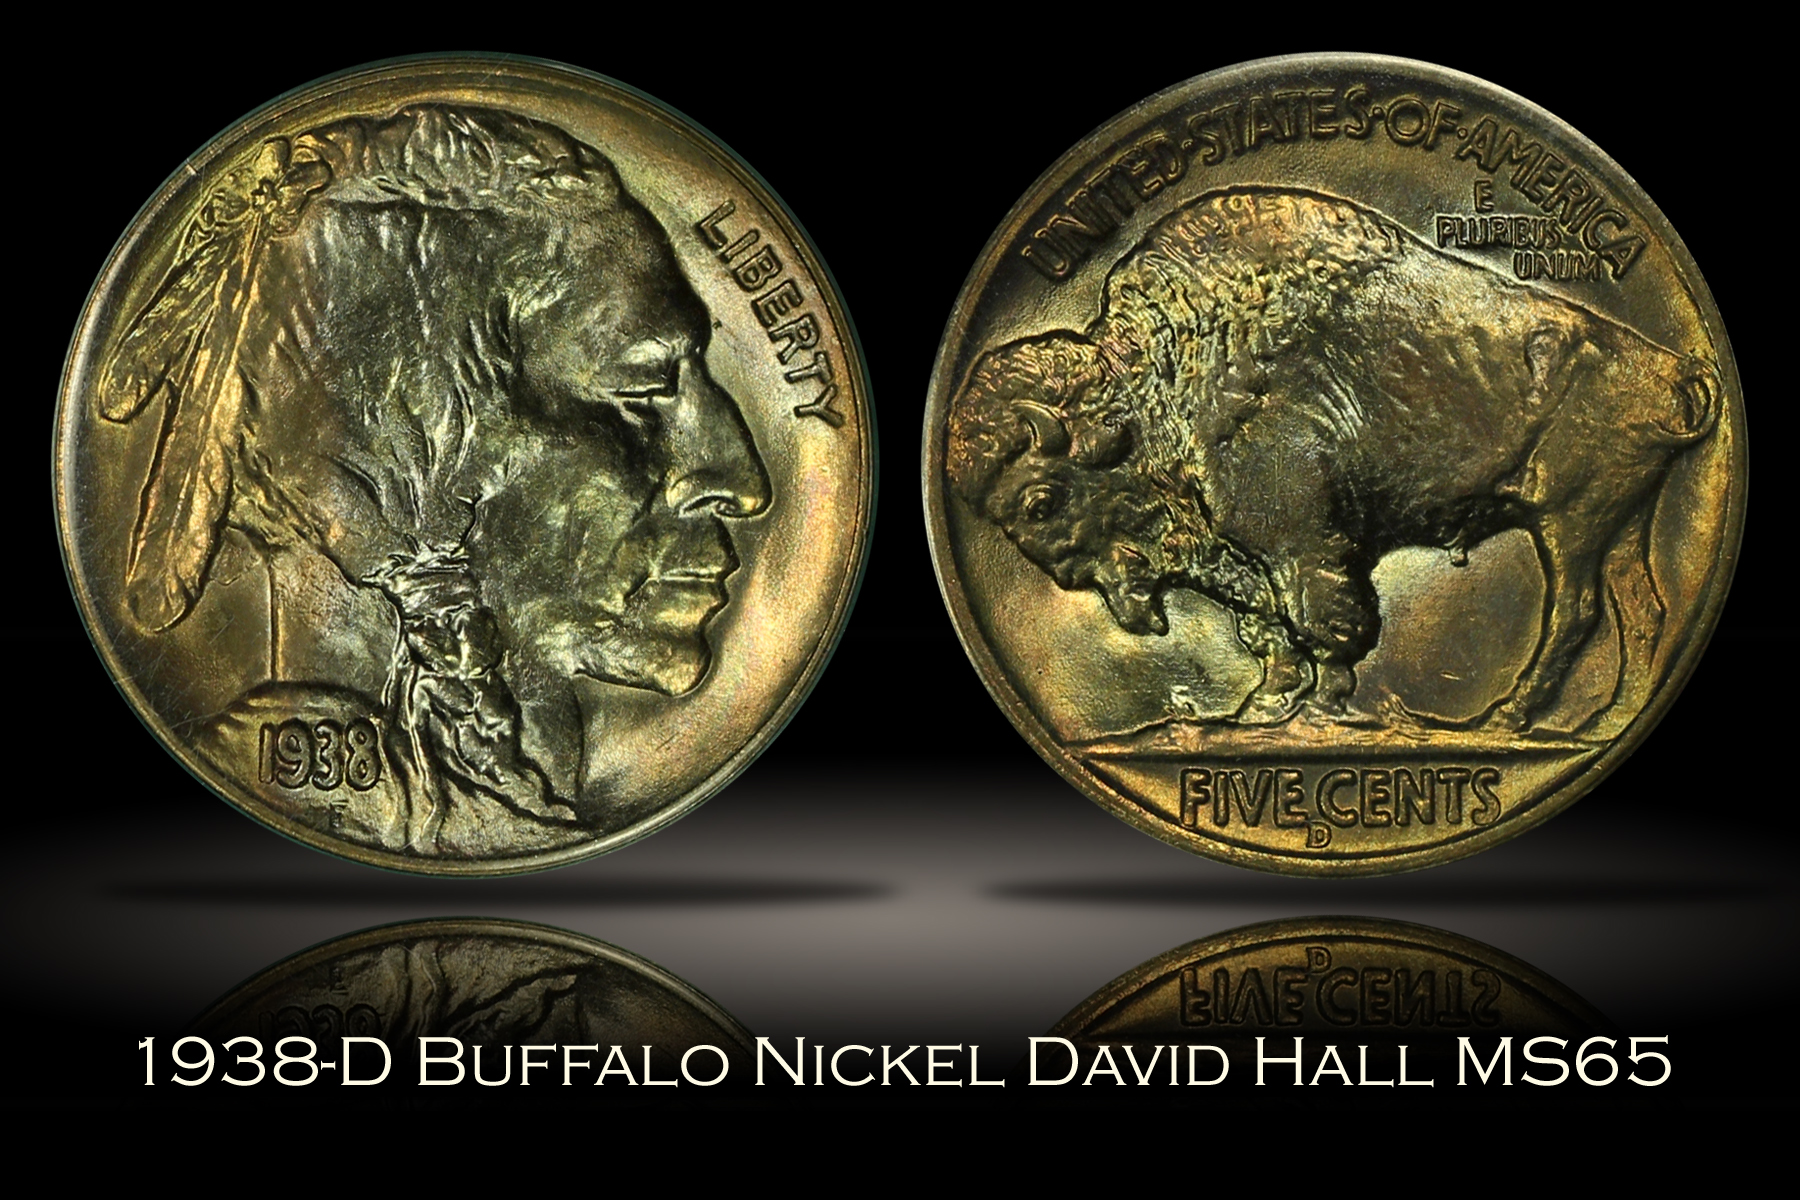 1938-D Buffalo Nickel David Hall's Numismatic Investment Group MS65